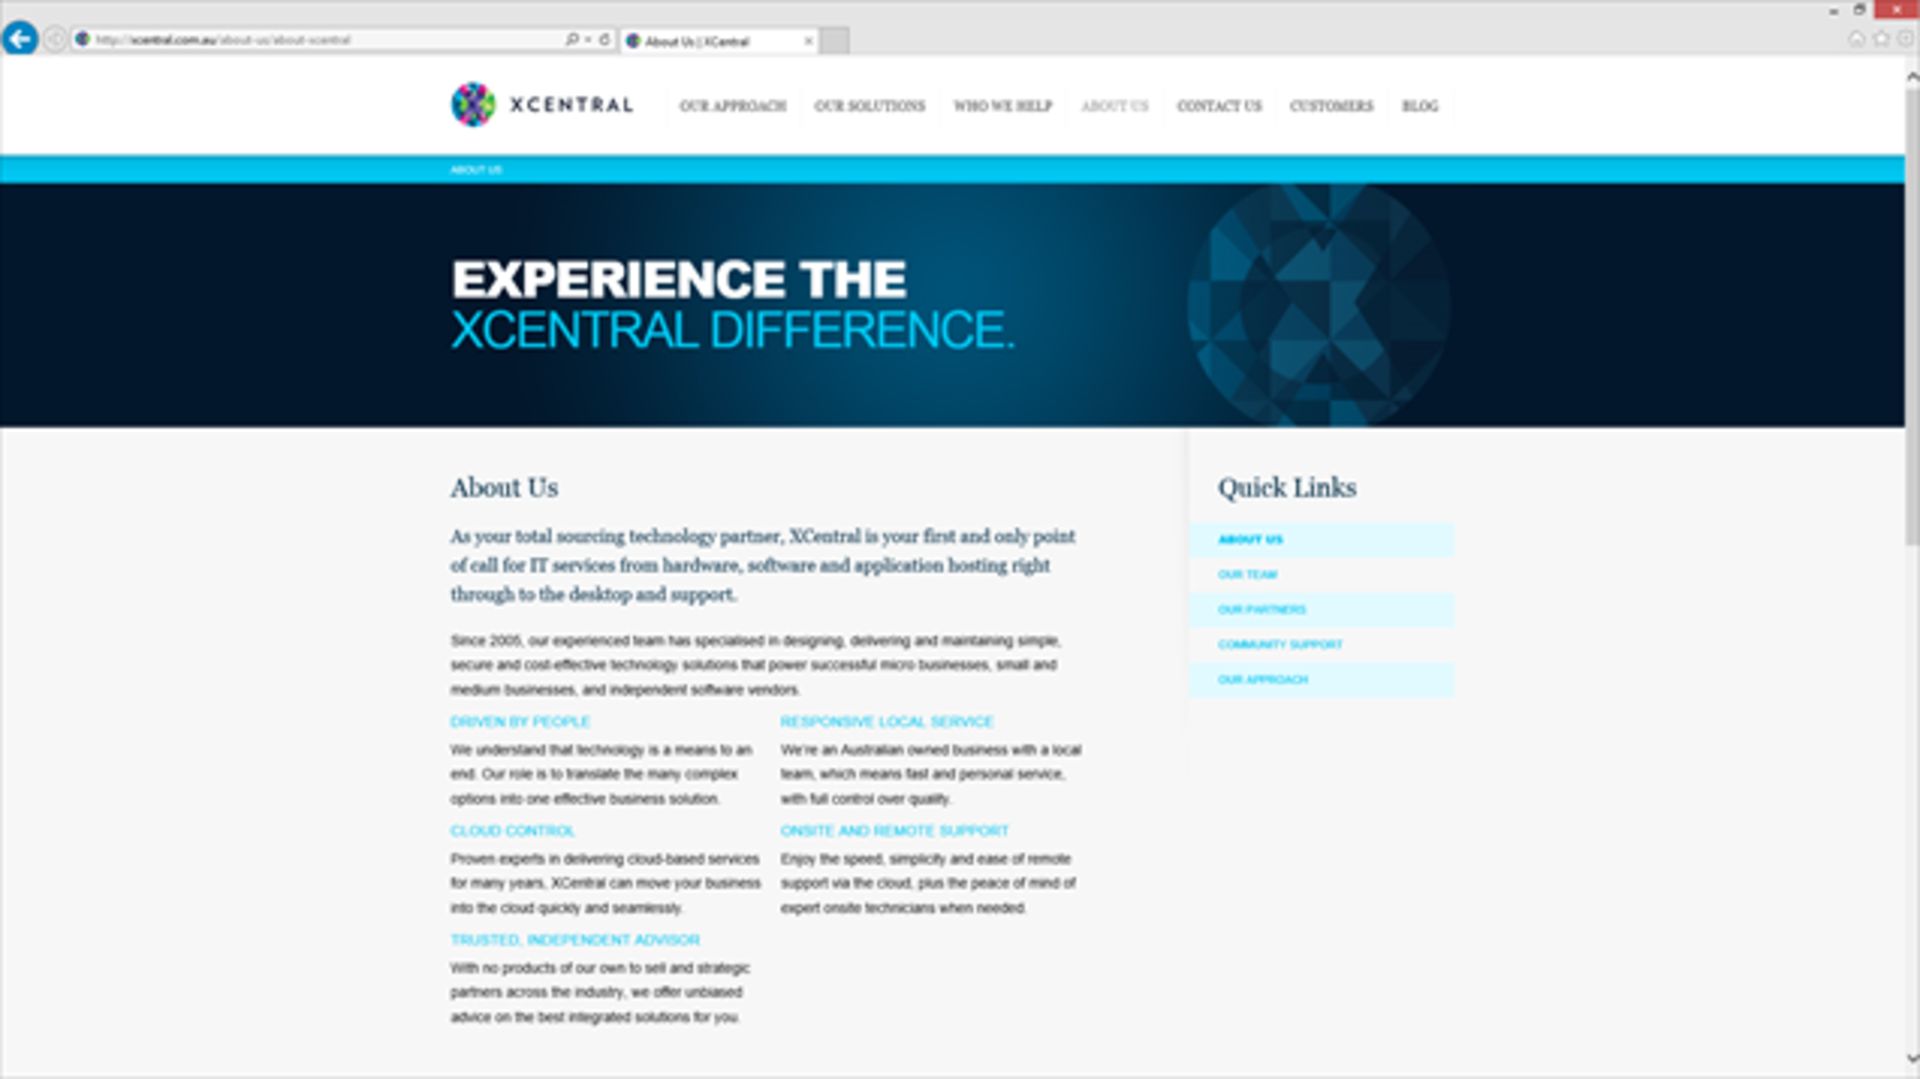 xcentral-ie-1920-1080 637x358